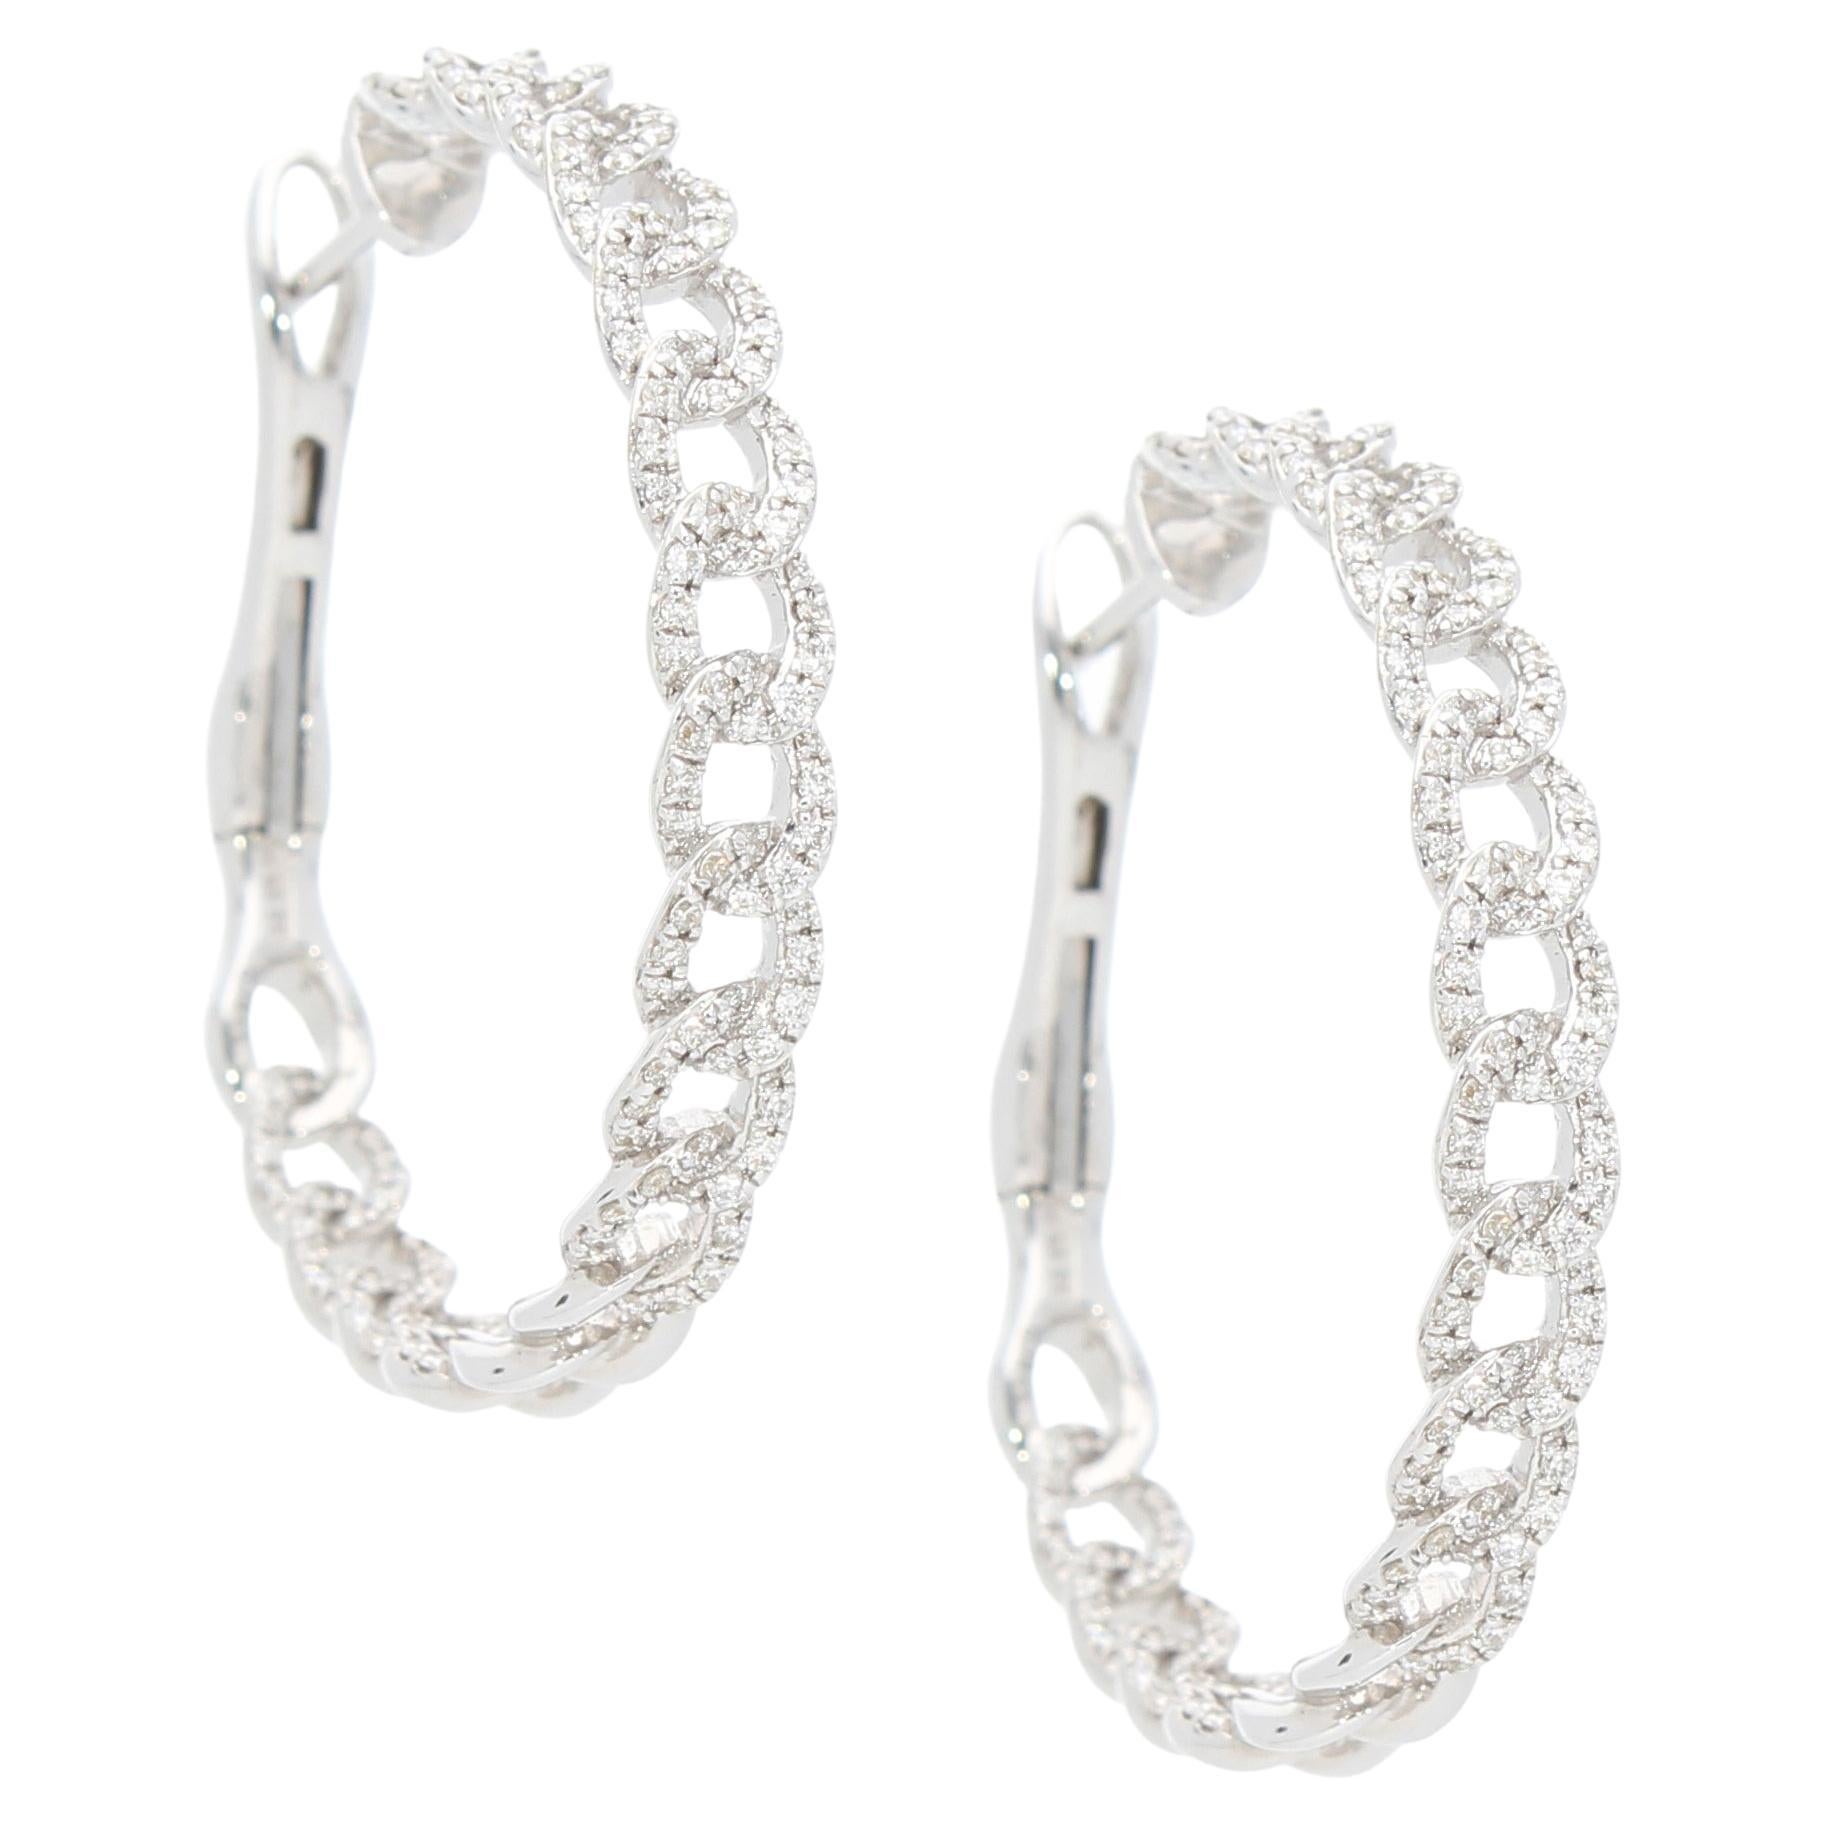 Boucles d'oreilles avec diamants Ct 0.79.Or 18 Kt, Made in Italy